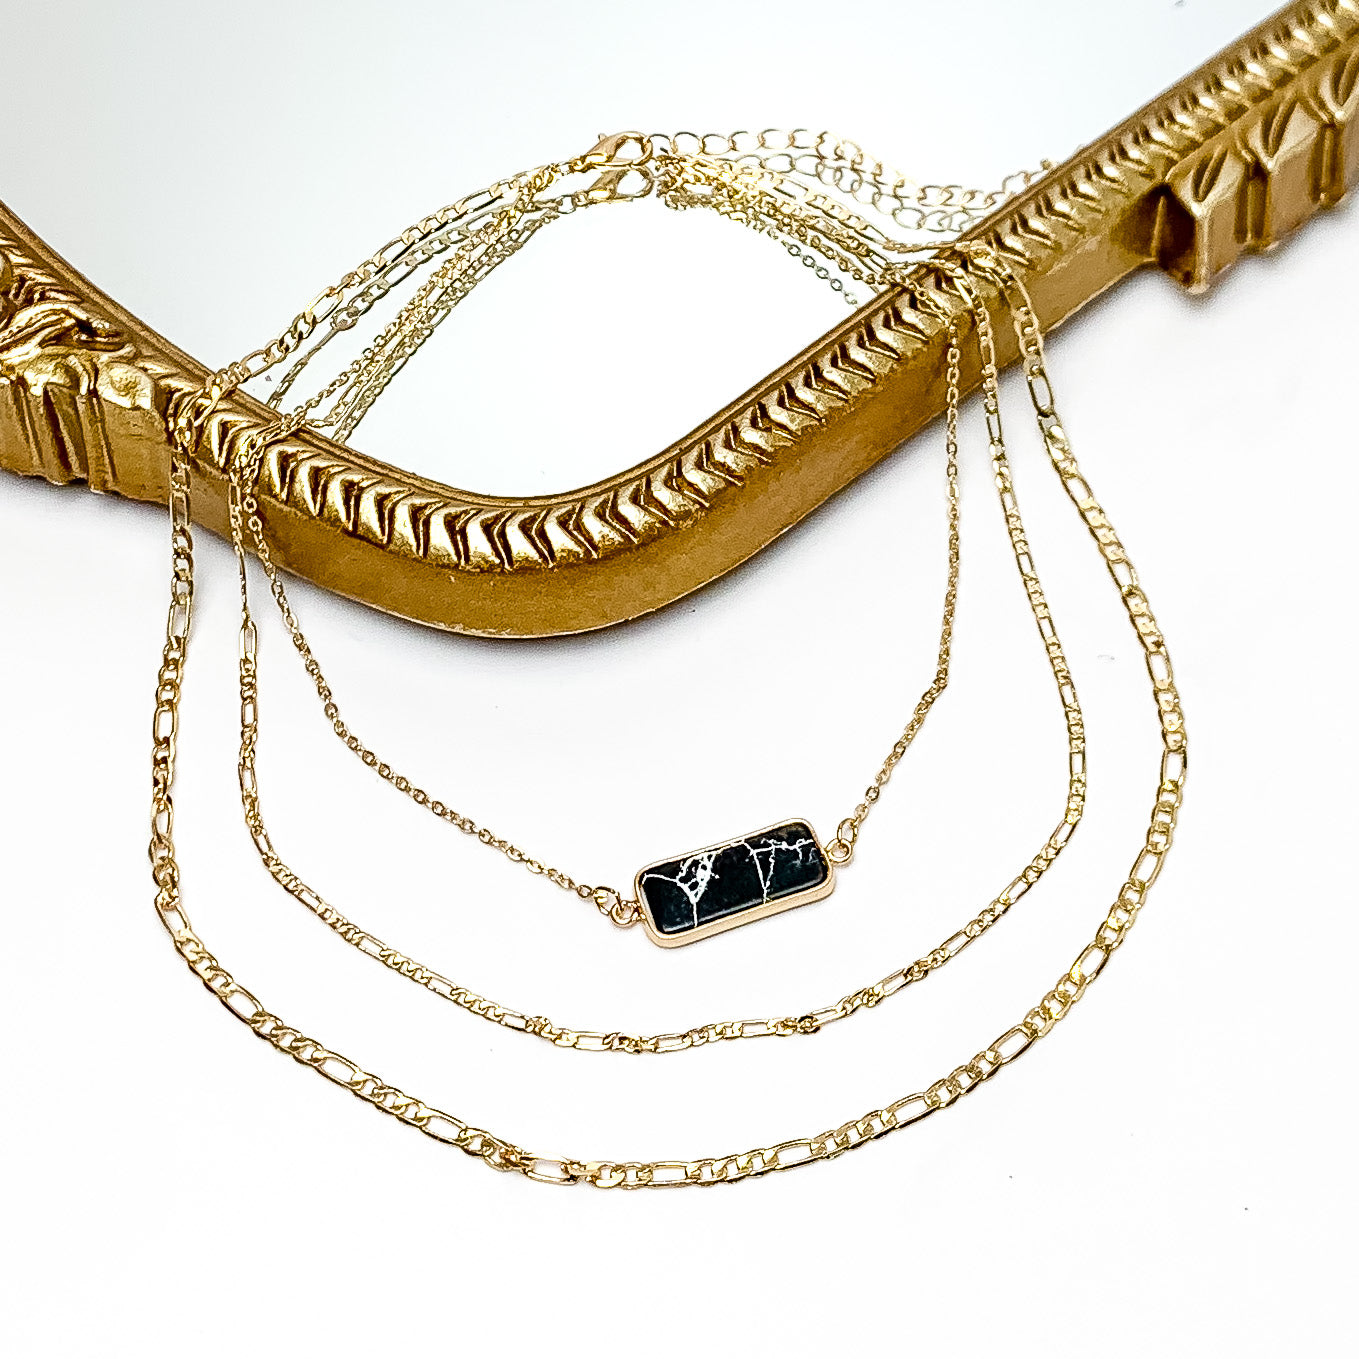 Black Stone Pendant Gold Tone Chain Three layered Necklace. Pictured on a white background with a mirror behind the necklace.